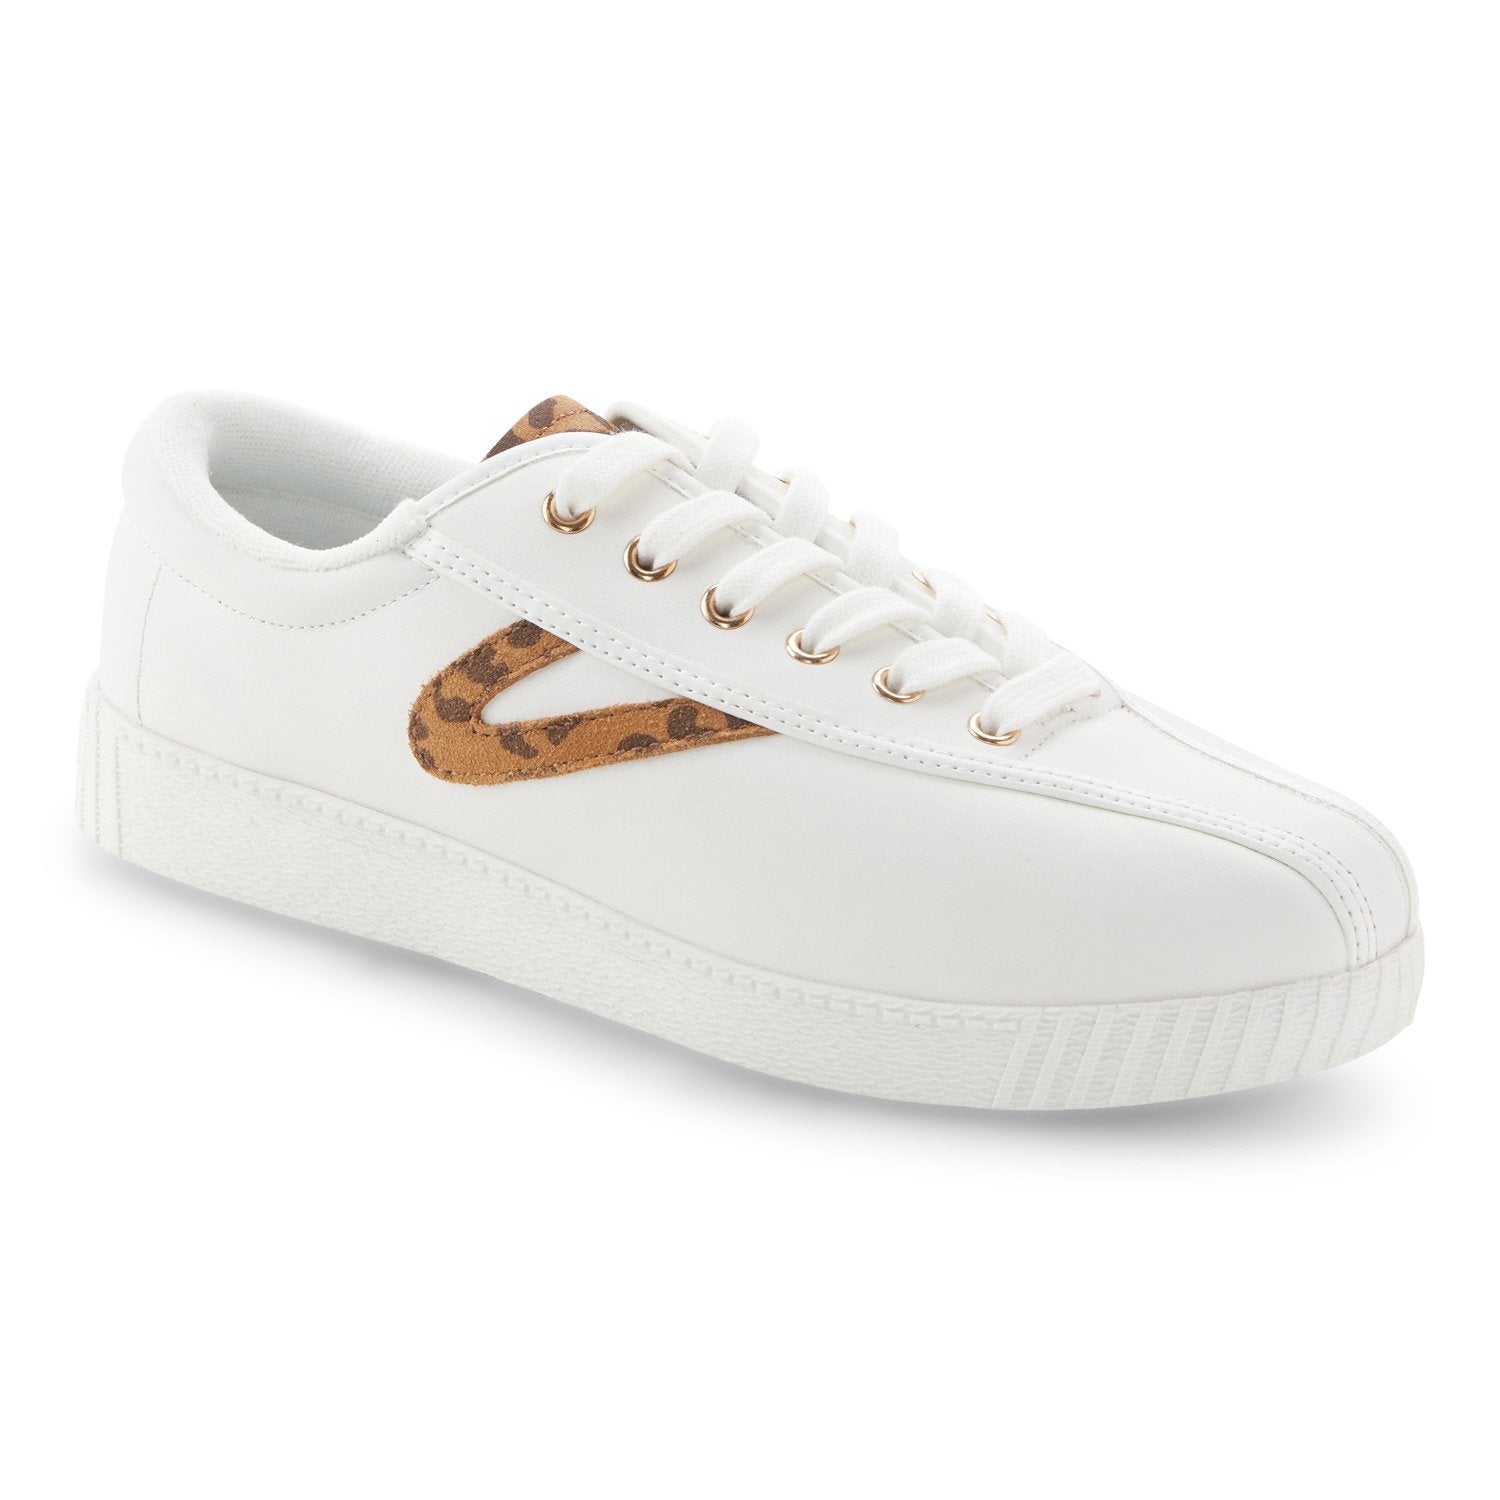 tretorn leather sneakers womens